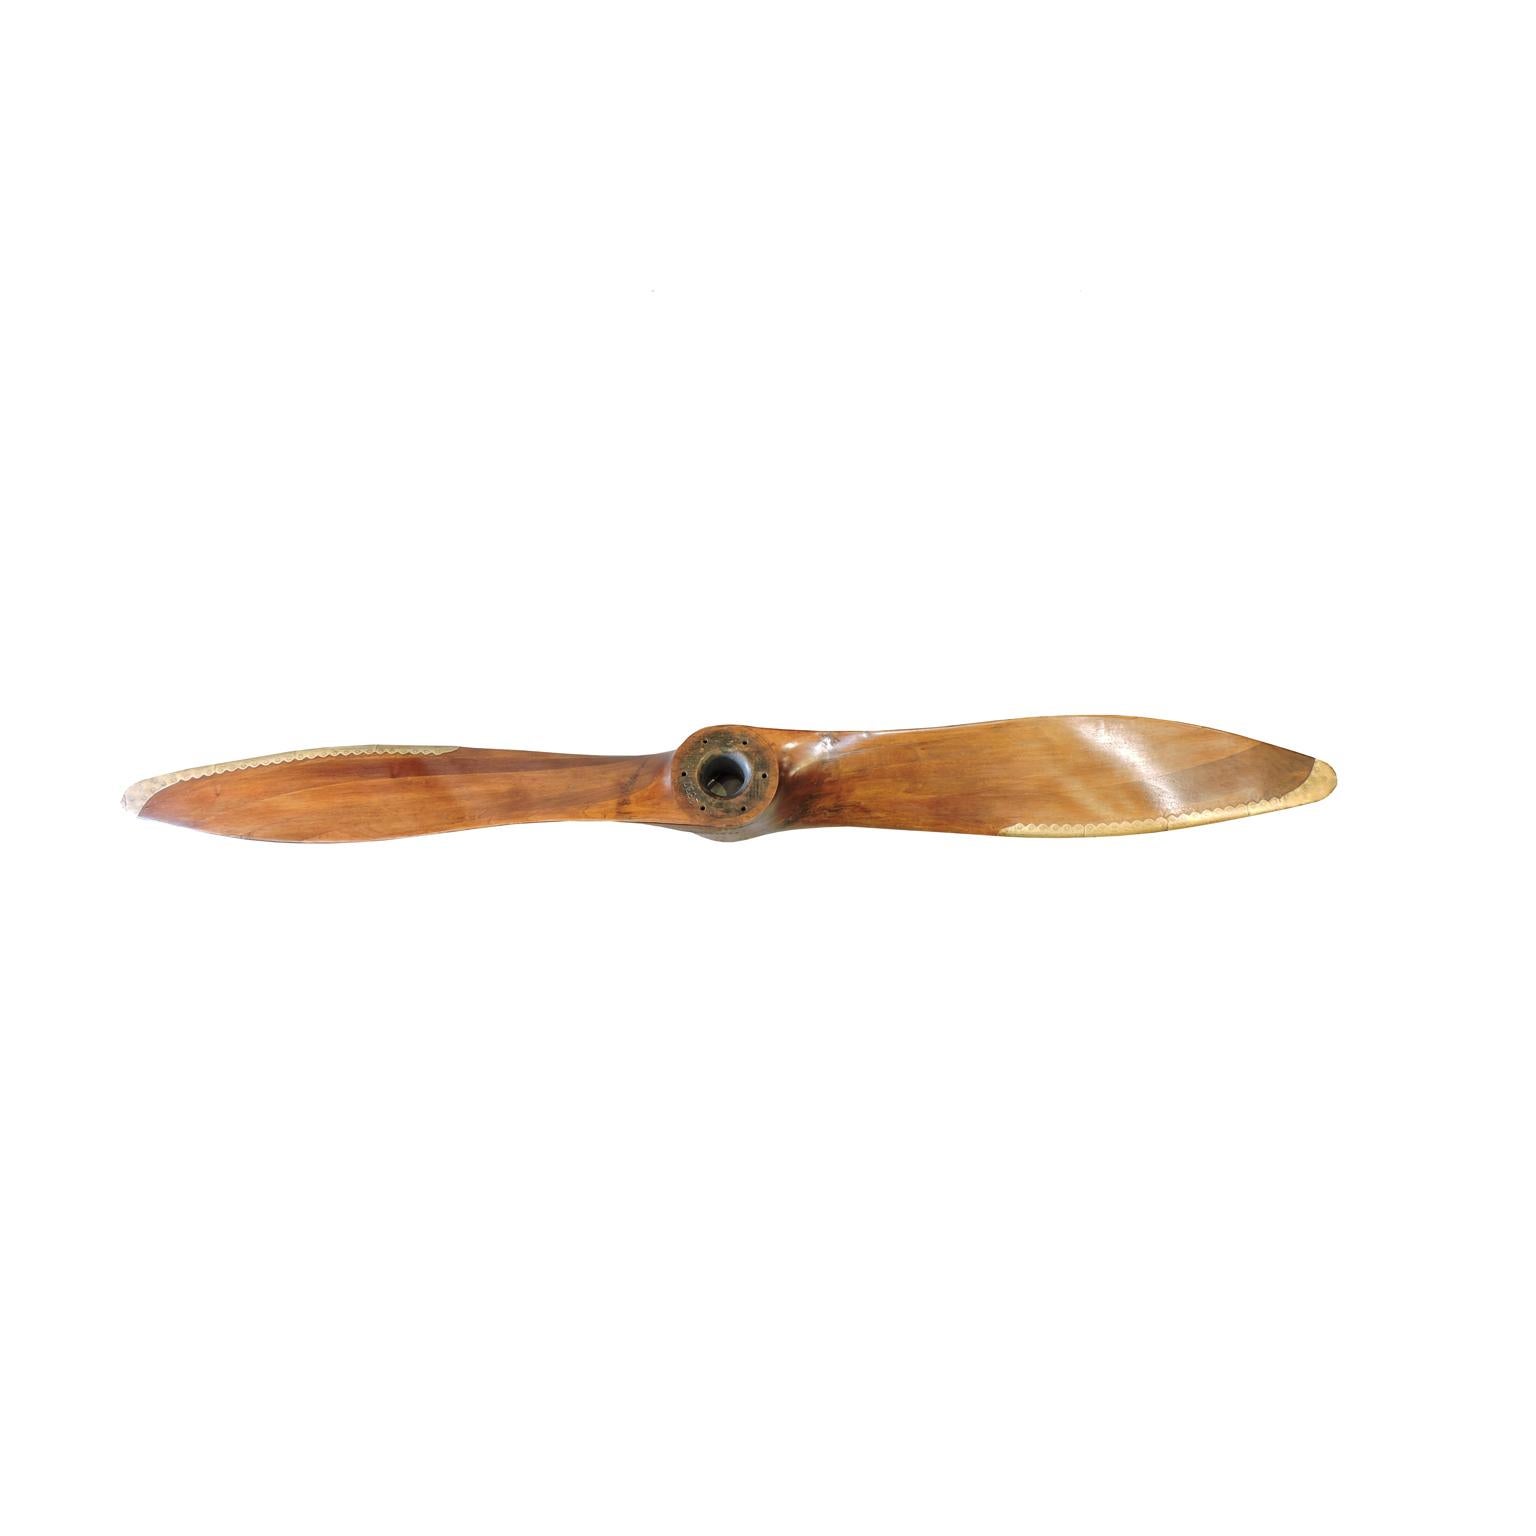 Walnut multilayer lamellar propeller with brass side reinforcements and hub with 6 holes, mounted on FIAT A 50 aircraft engine, for Caproni Ca 100 single-engine two-seater biplane produced from 1928 to 1932, airplane known as Caproncino. 209x13.5x21